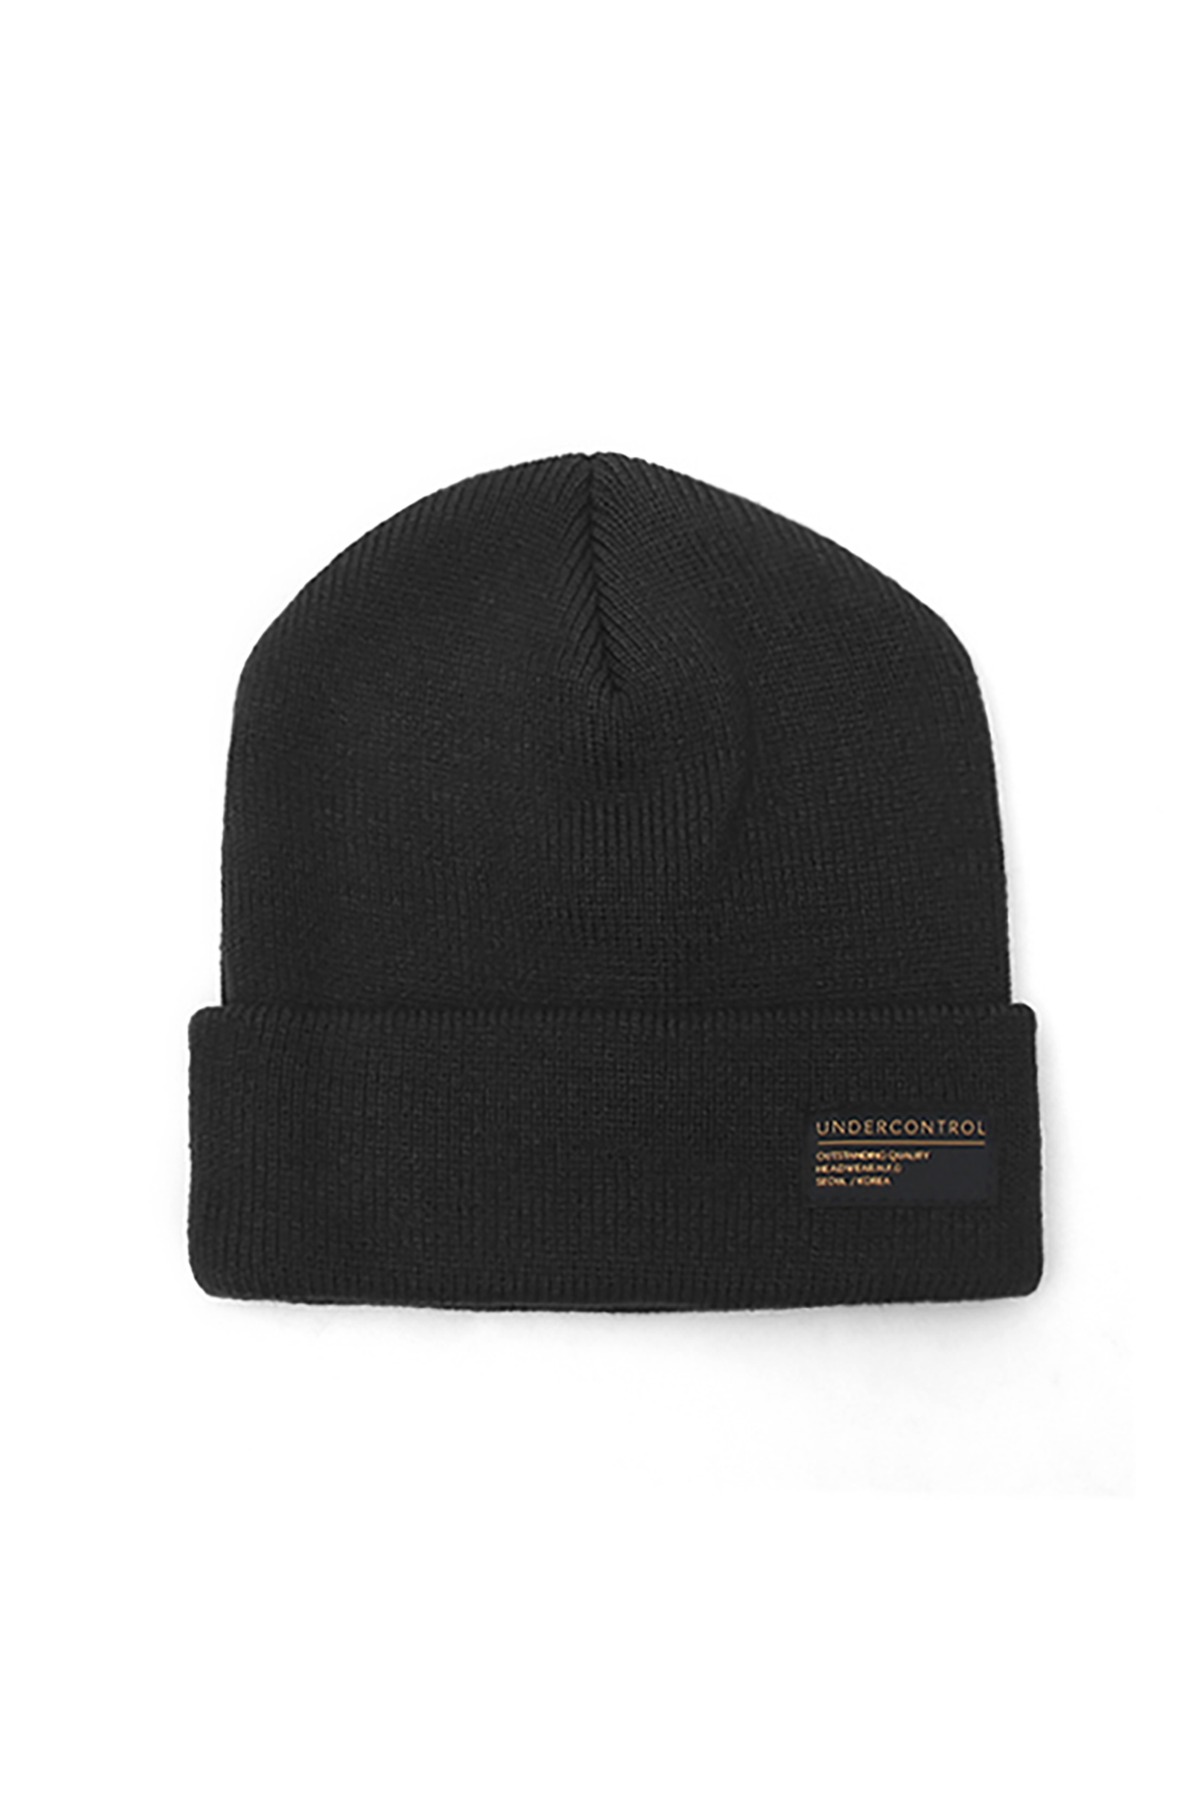 BEANIE / LOOSE FIT / AC / BOLD BLACK (BOX PACKAGE)